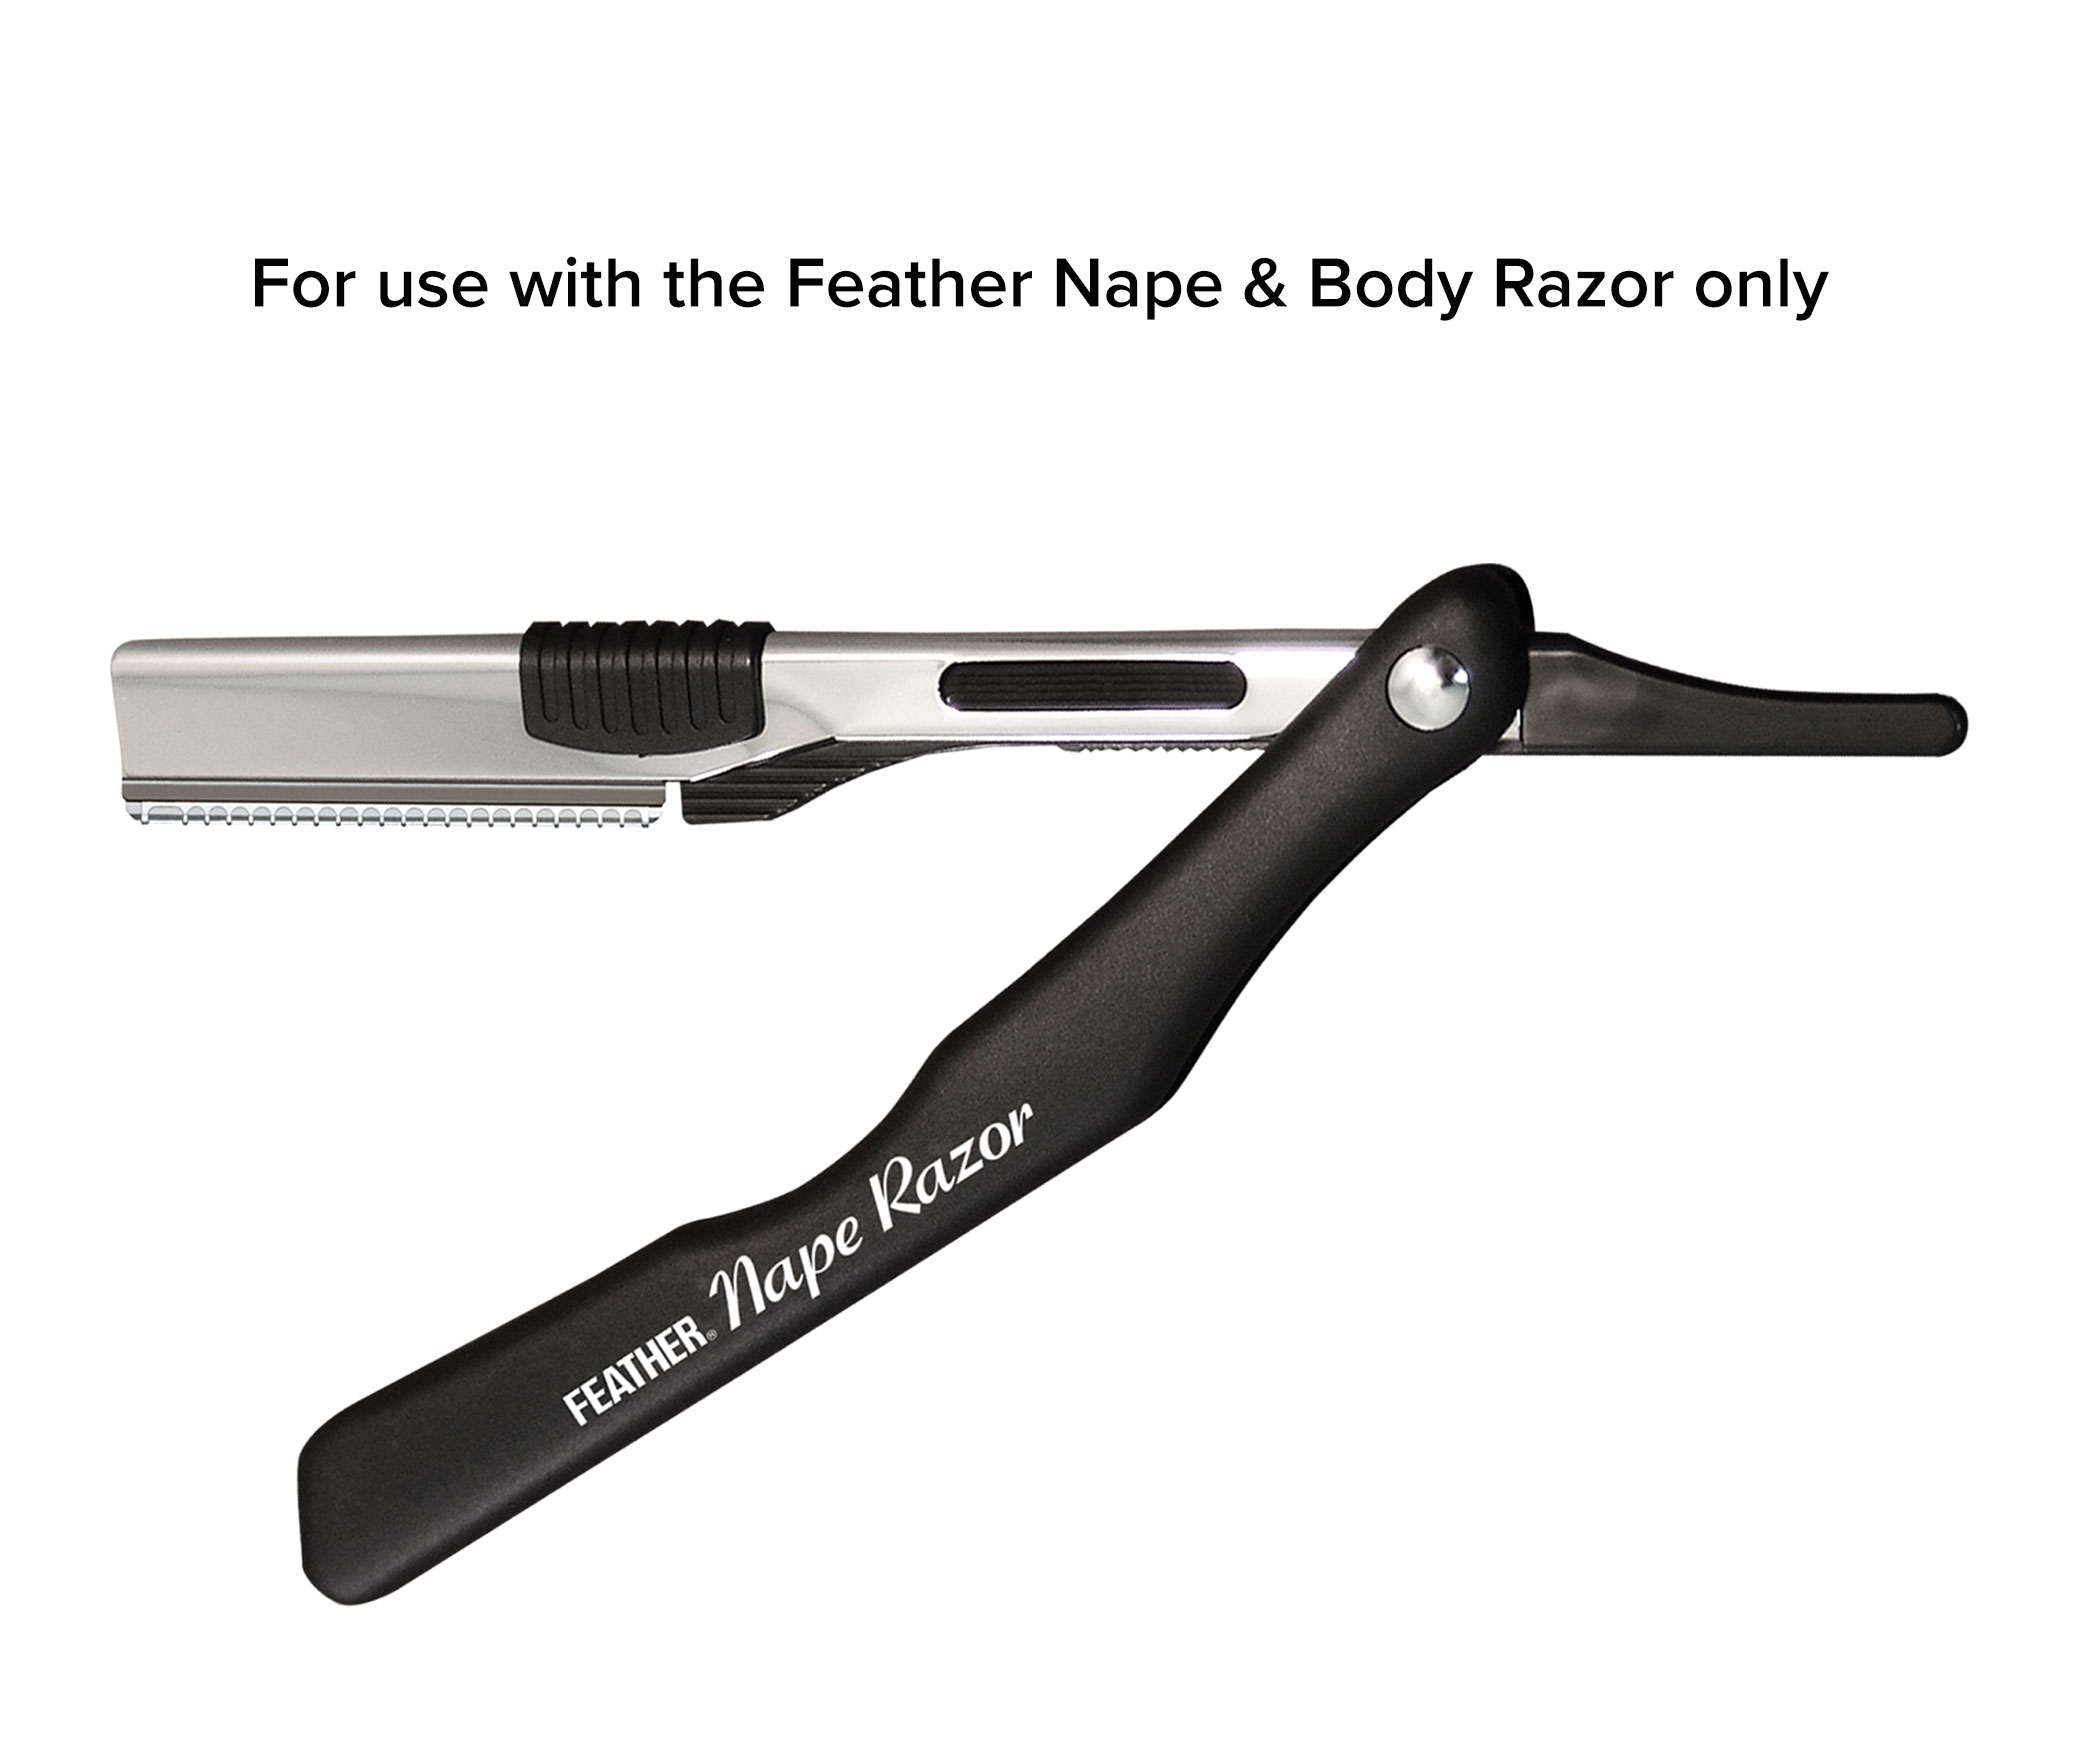 For use with the Feather Nape and Body Razor Handle